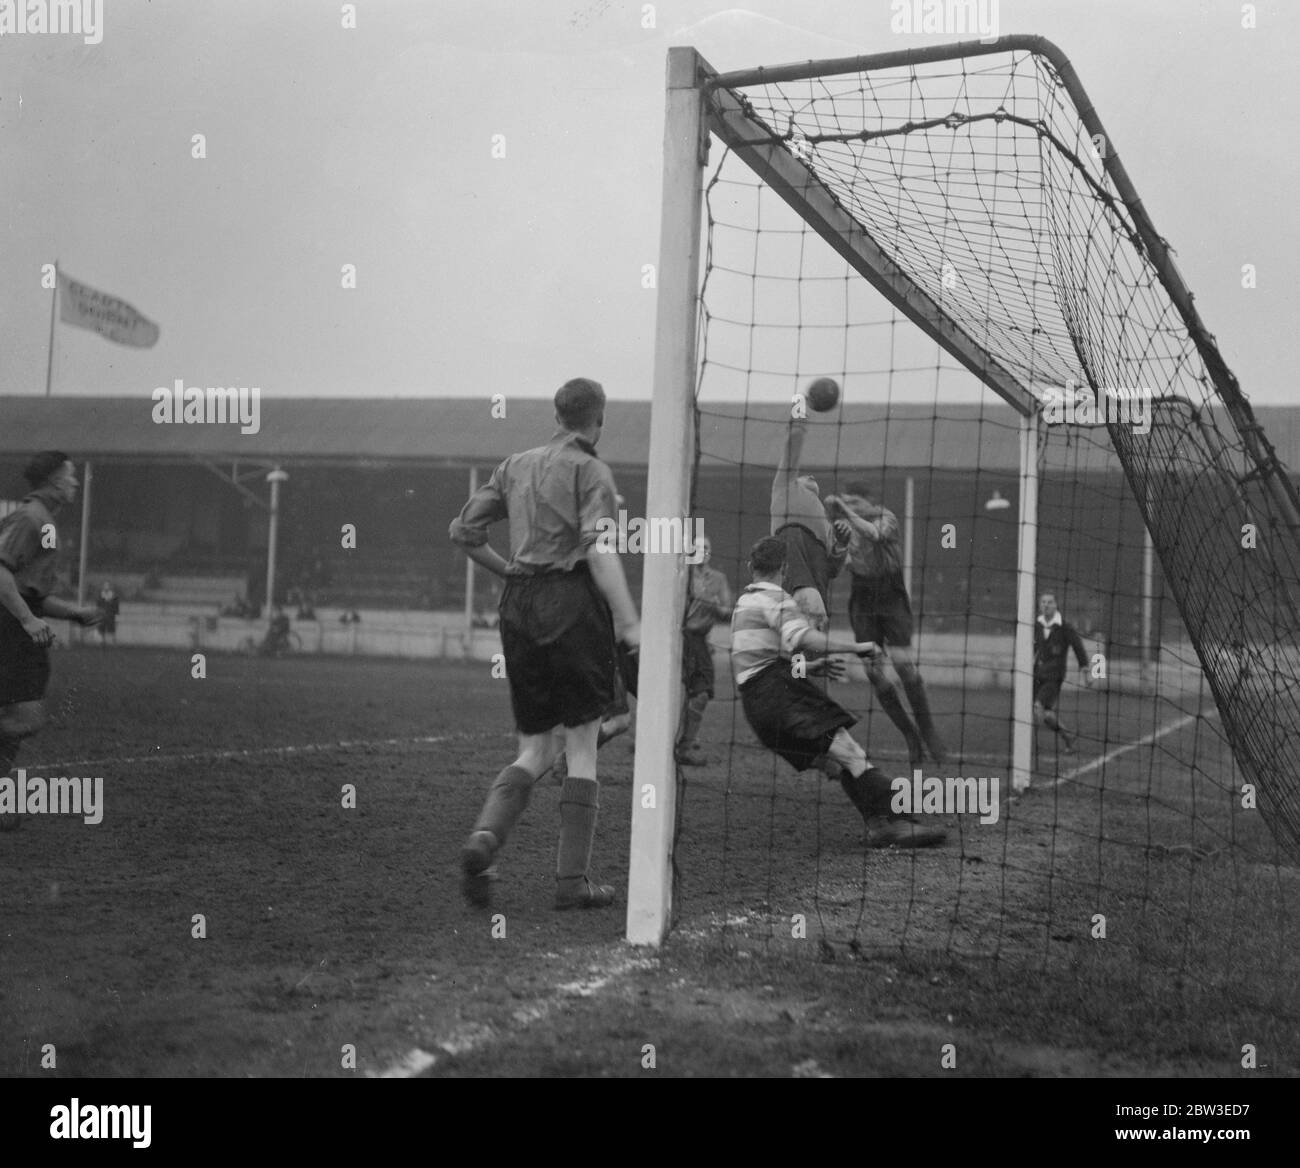 Norman Wharton makes spectacular save at Lea Bridge . Clapton Oriant met Norwich City in a Southern League match at the Lea Bridge Road ground . A spectacular save by Wharton , Norwich City goalkeeper . 11 February 1935 Stock Photo